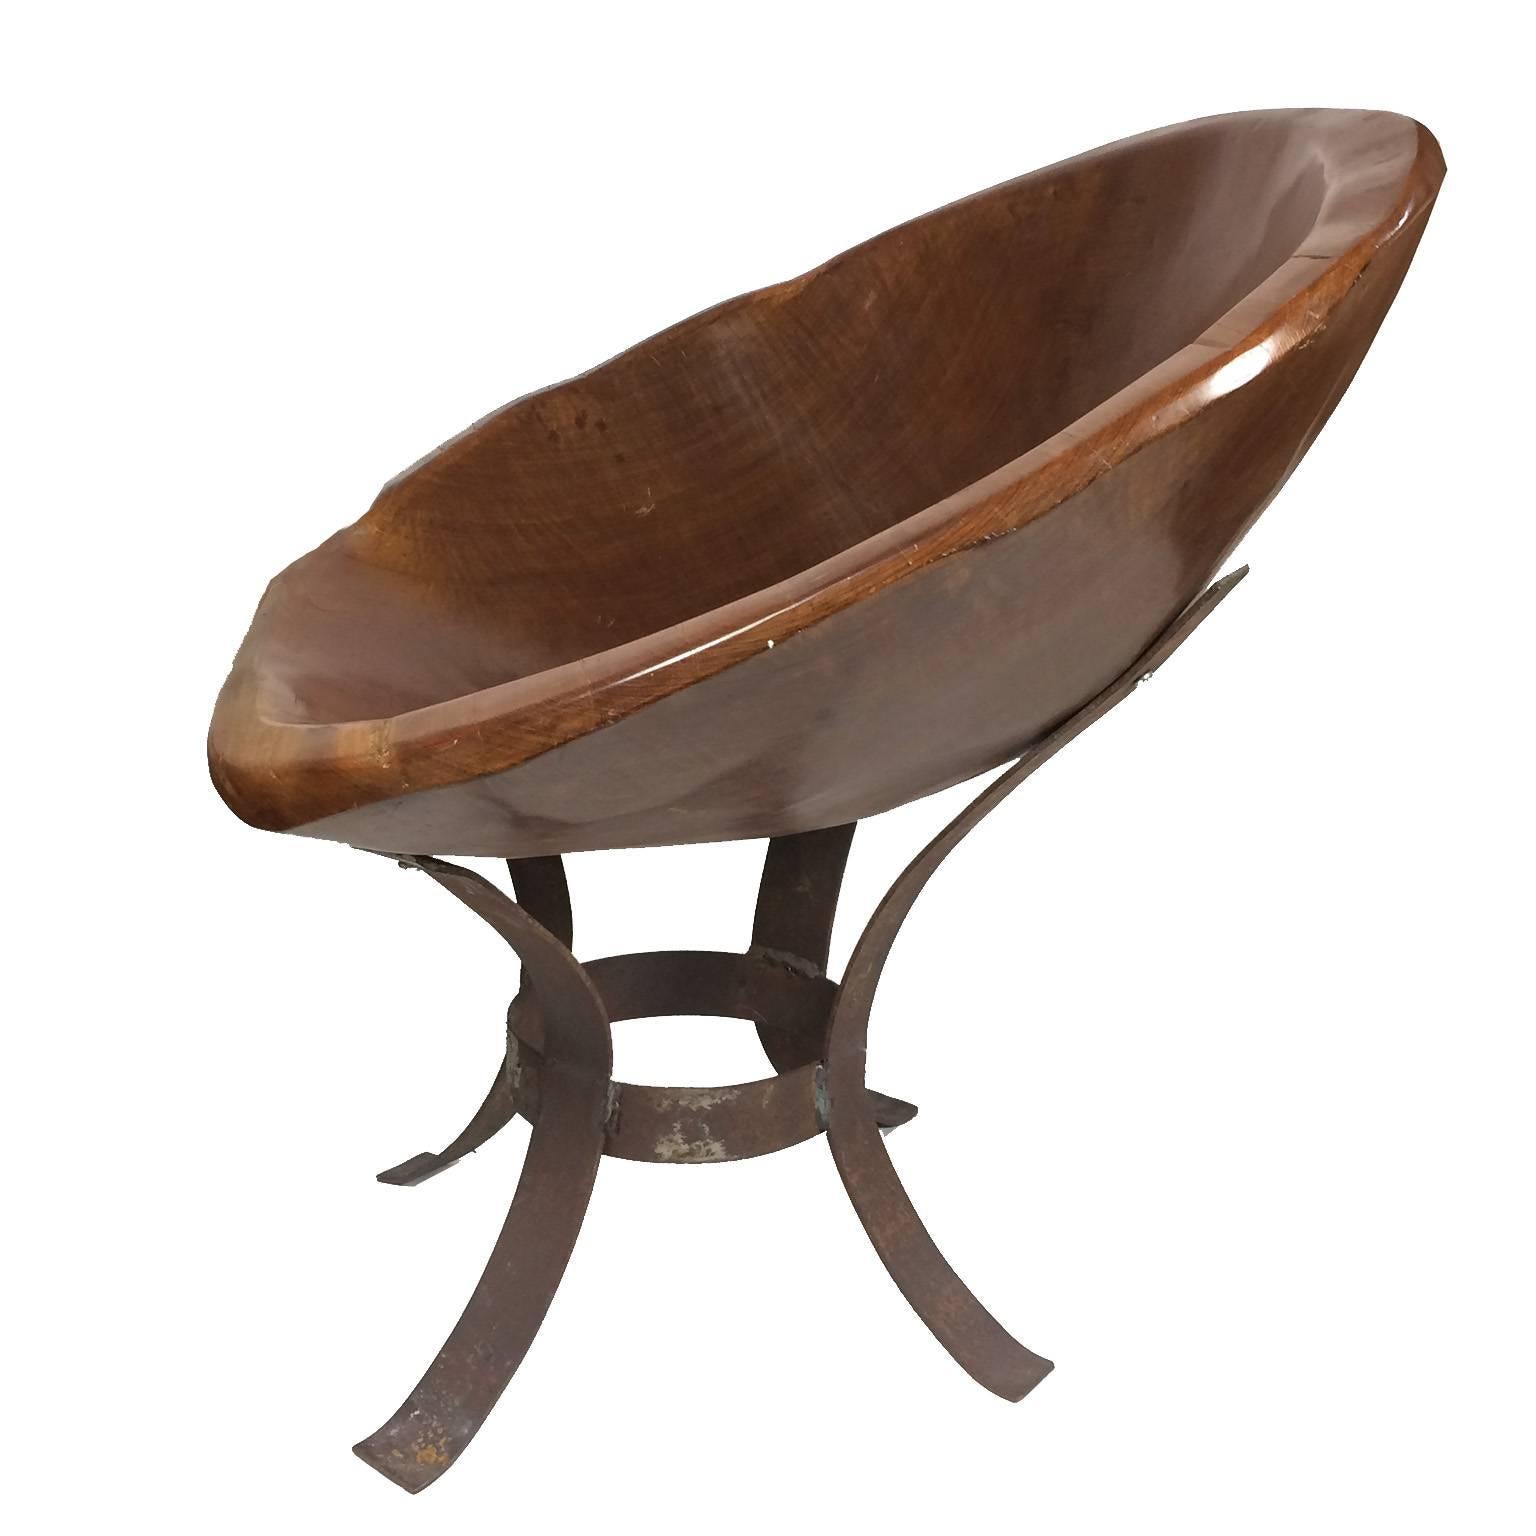 Funky Mid-Century Modern carved hardwood chair, raised on an iron banded base. Measure: Seat height 17 inches, height 28 inches, diameter 29 inches. Quite comfortable.